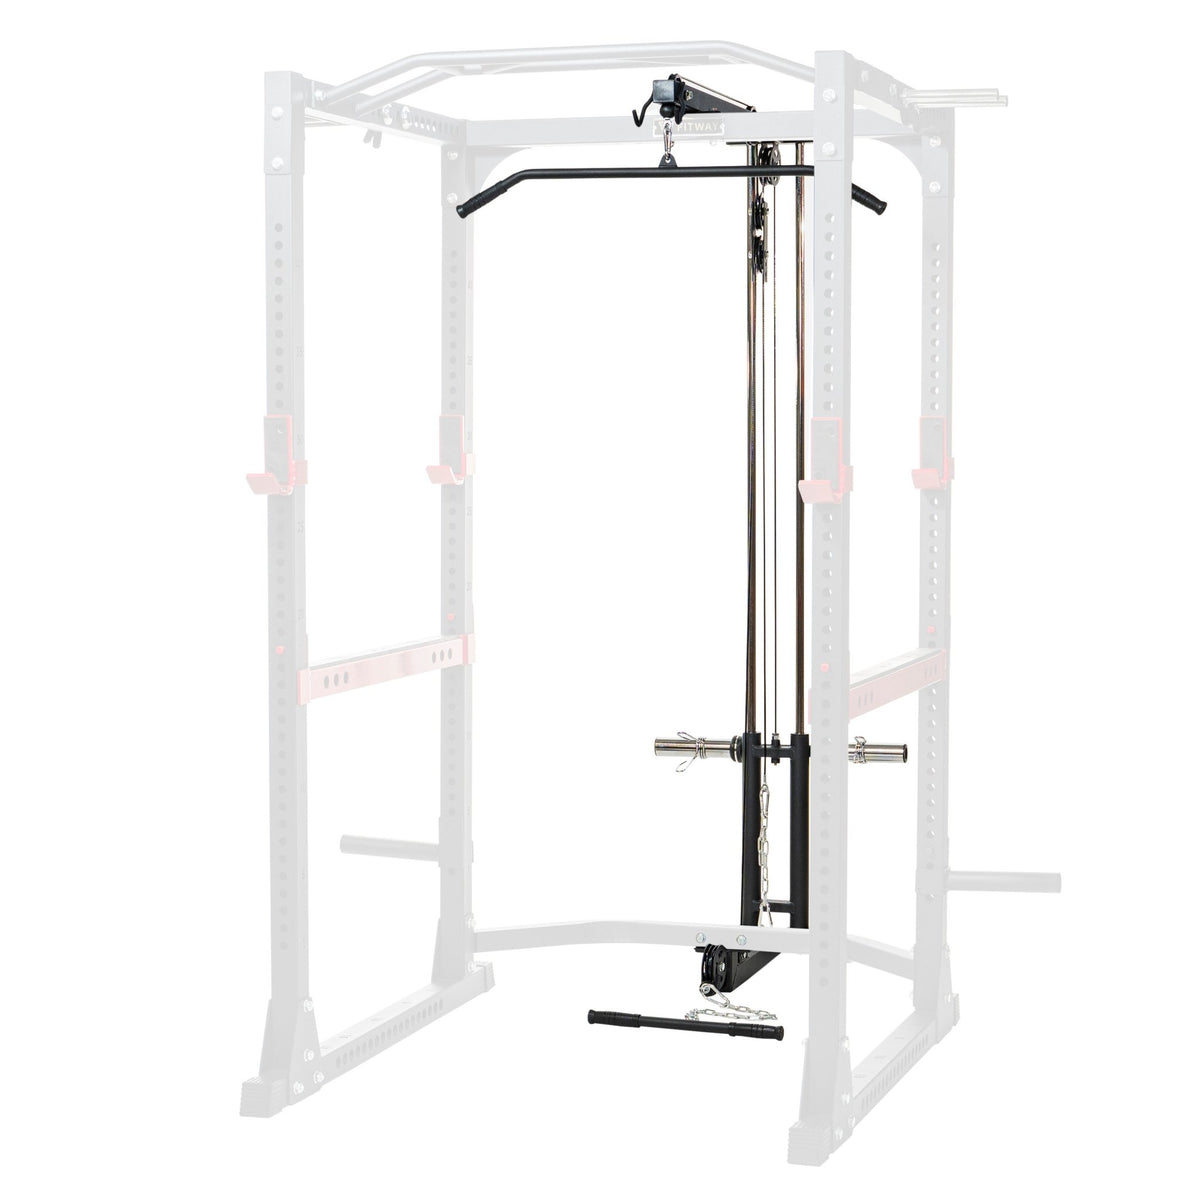 FitWay Equip. FitWay Power Cage - Fitness Experience